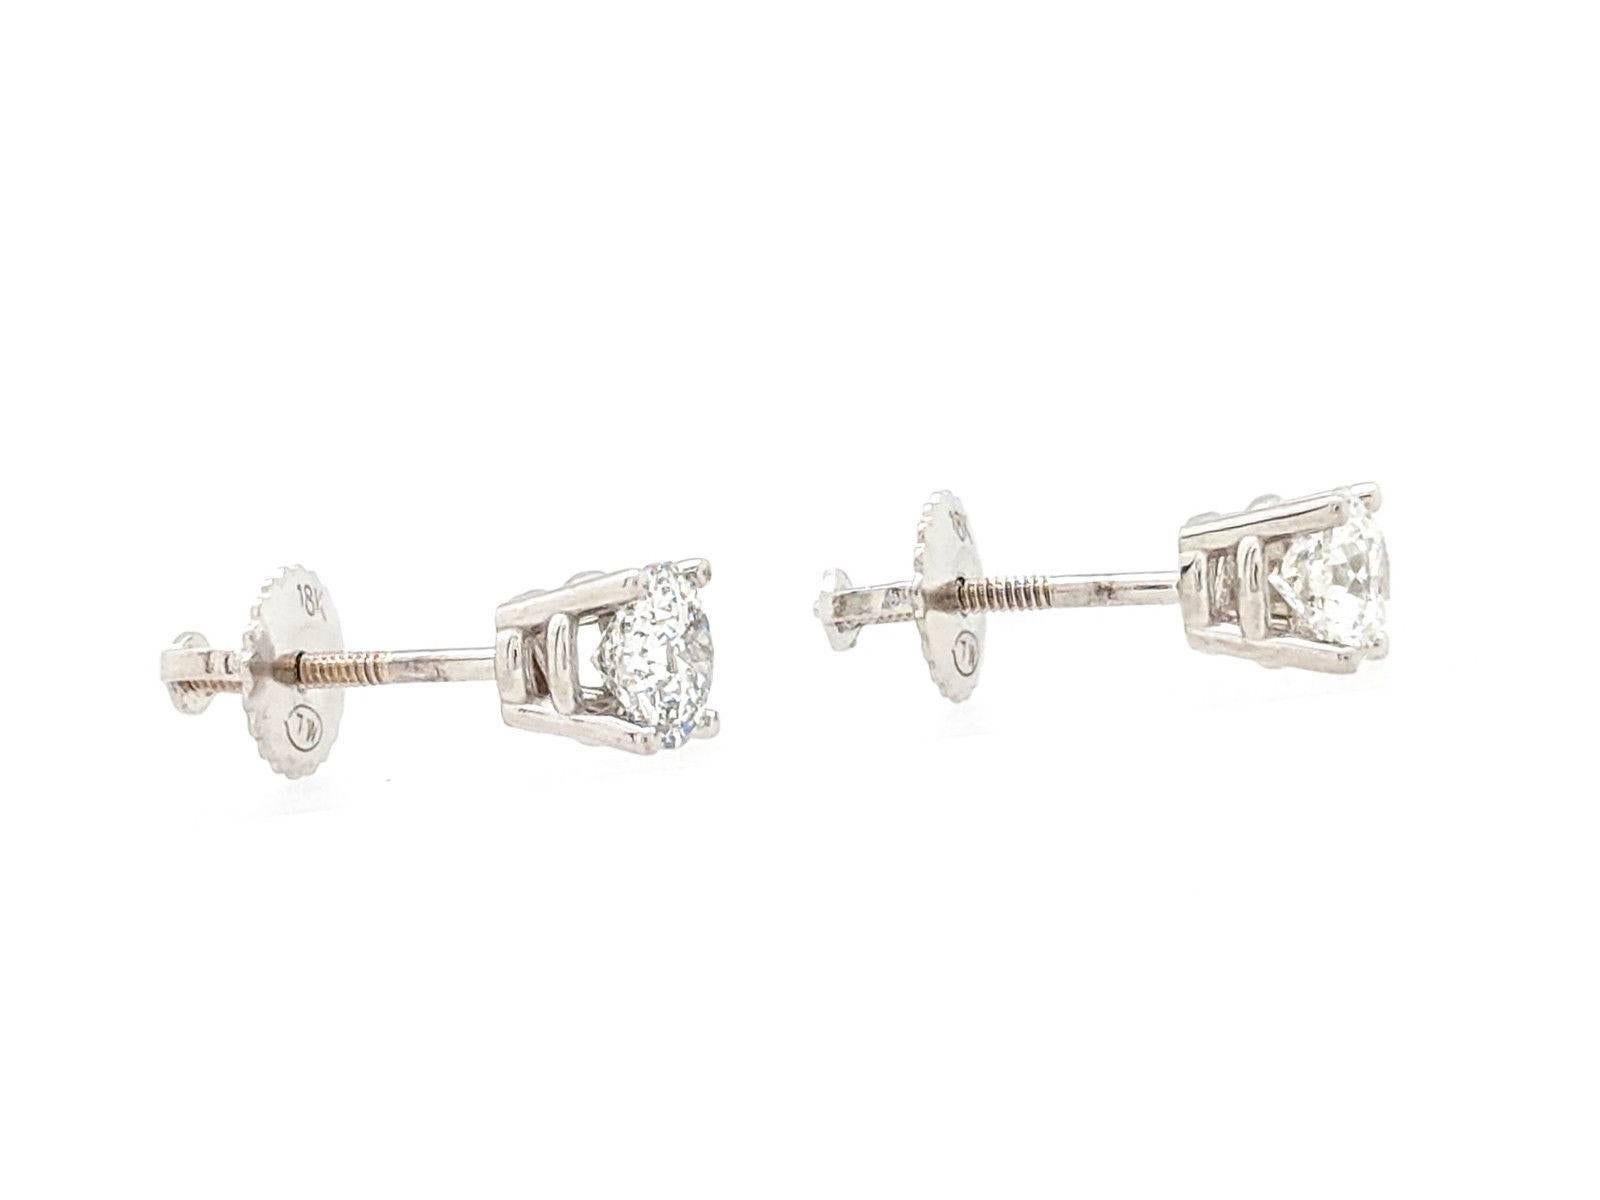 Round Cut .78ct Round Brilliant Cut Diamond Stud Earrings in 18K White Gold GSI Certified